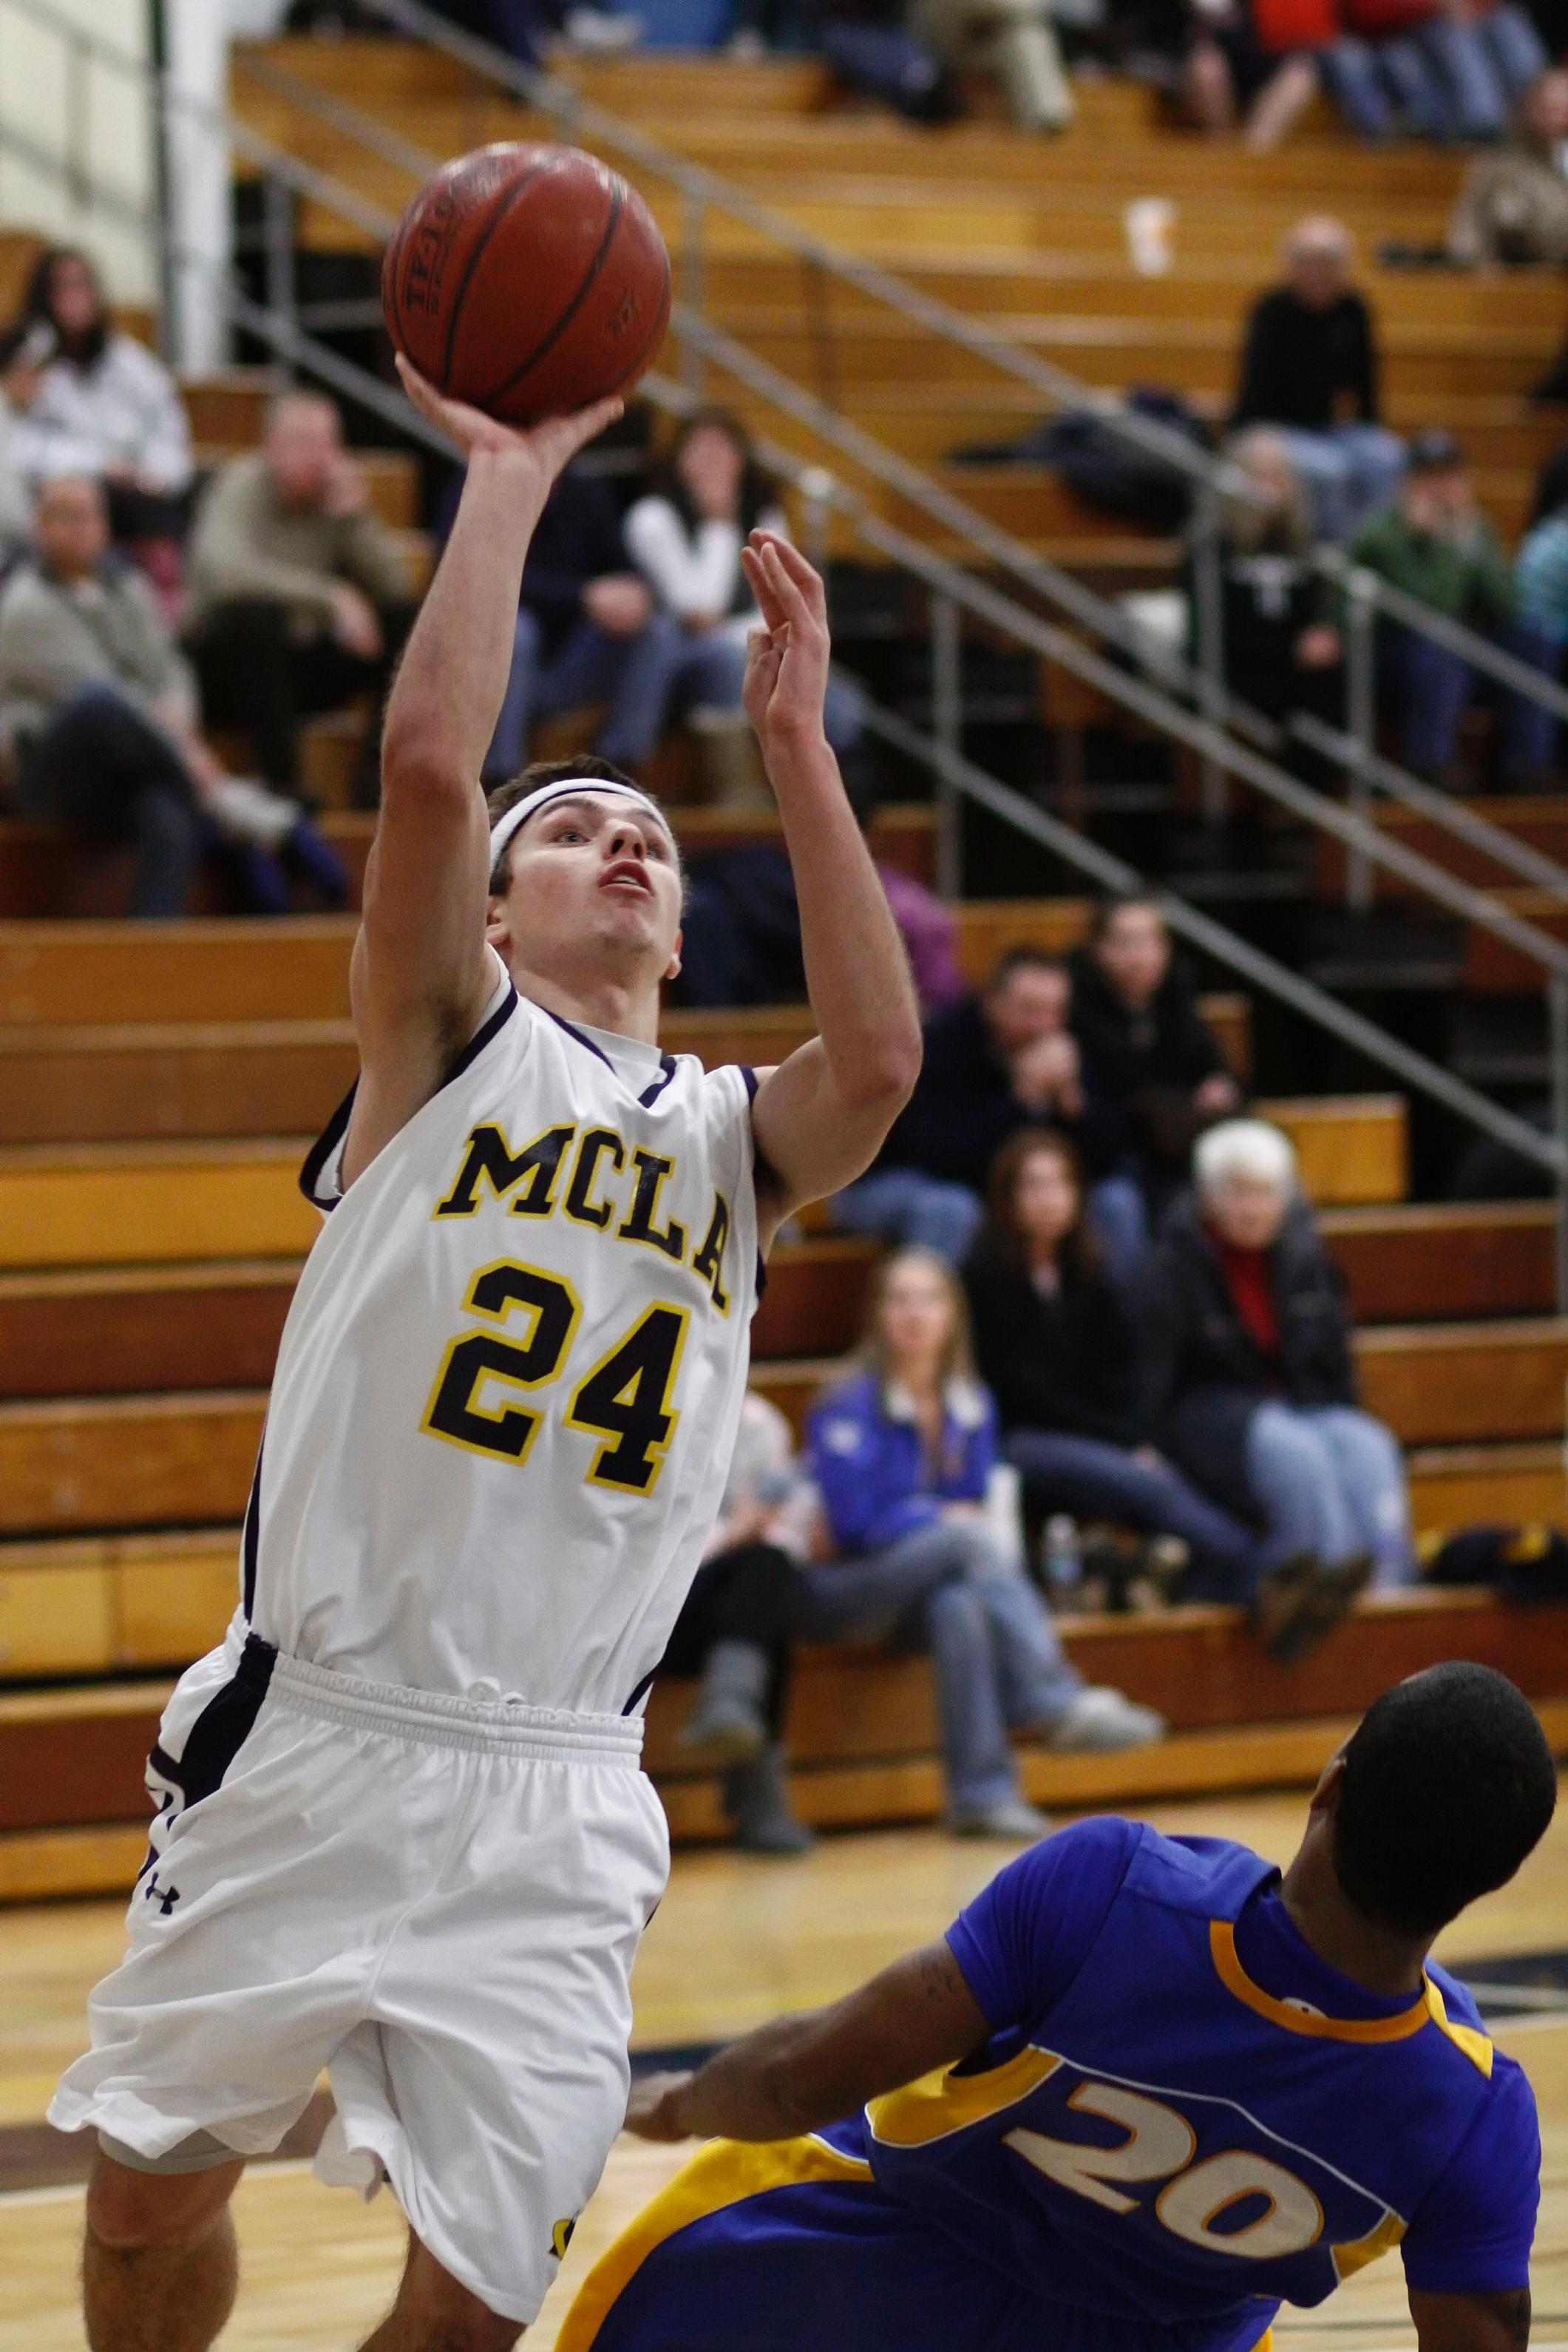 MCLA can't keep pace with Salem, fall 97-86